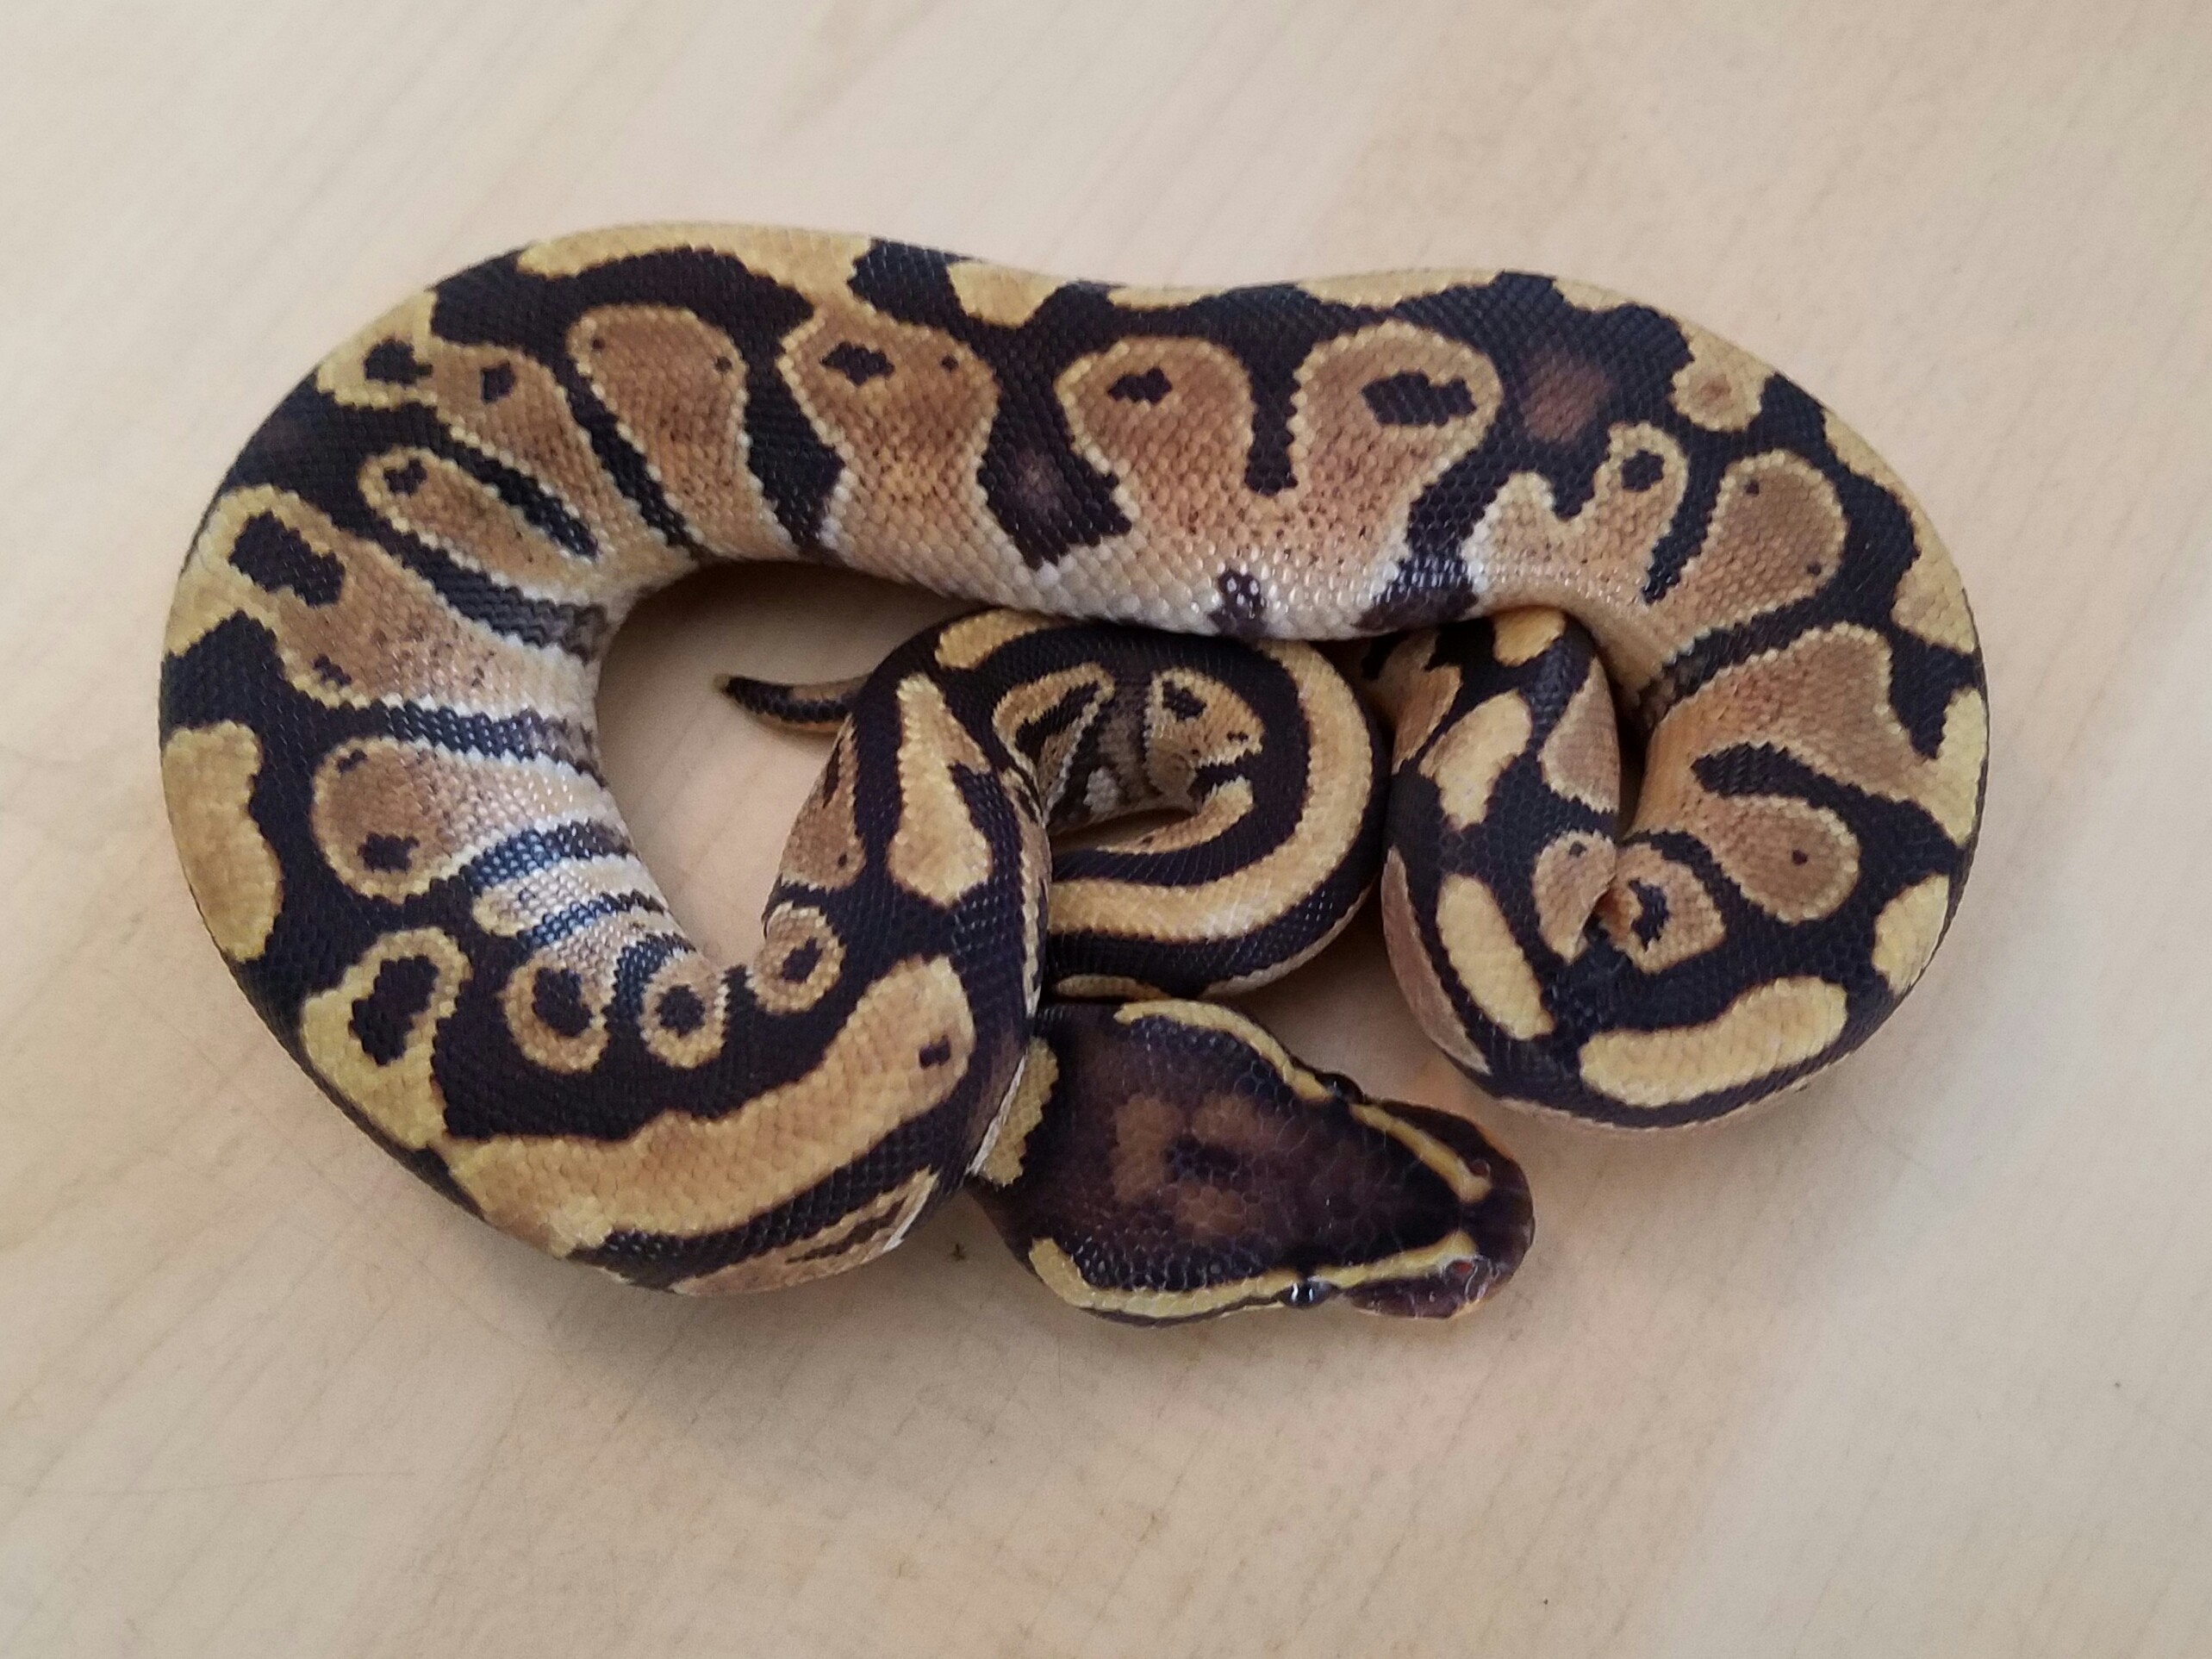 Flame Ball Python by Queen City Constrictors